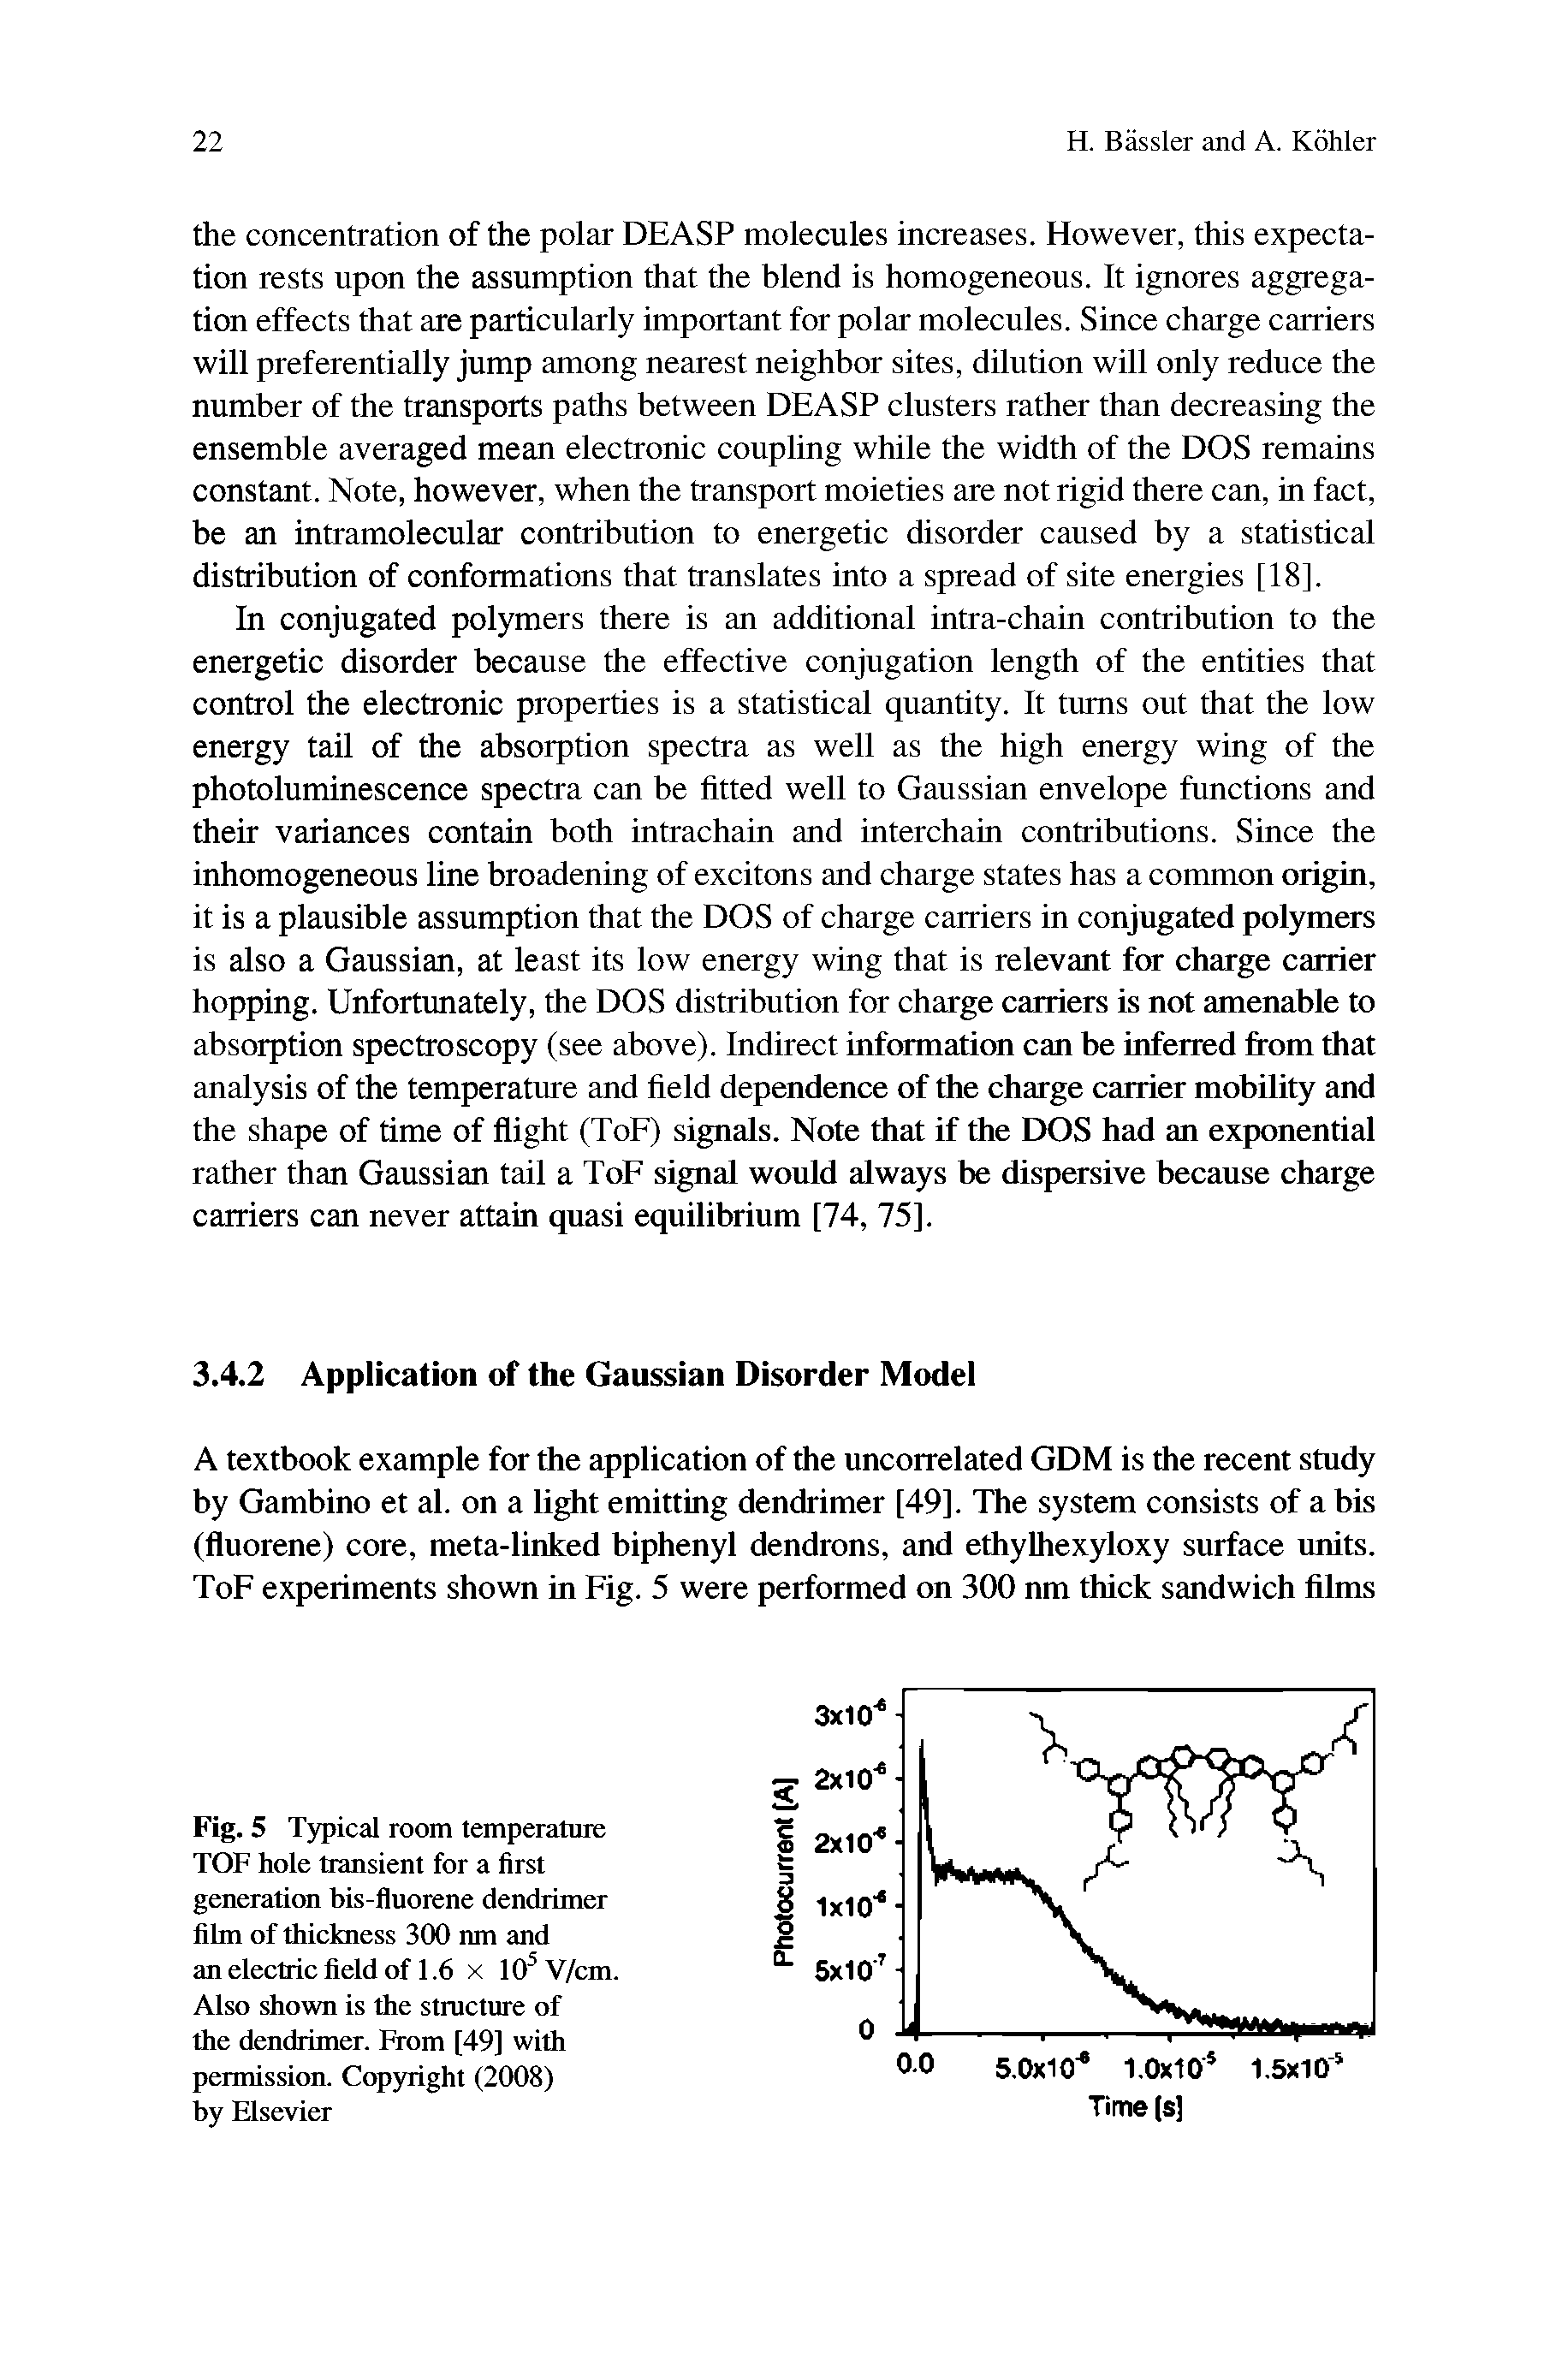 Fig. 5 Typical room temperature TOF hole transient for a first generation bis-fluorene dendrimer film of thickness 300 nm and an electric field of 1.6 x lO V/cm. Also shown is the structure of the dendrimer. From [49] with permission. Copyright (2008) by Elsevier...